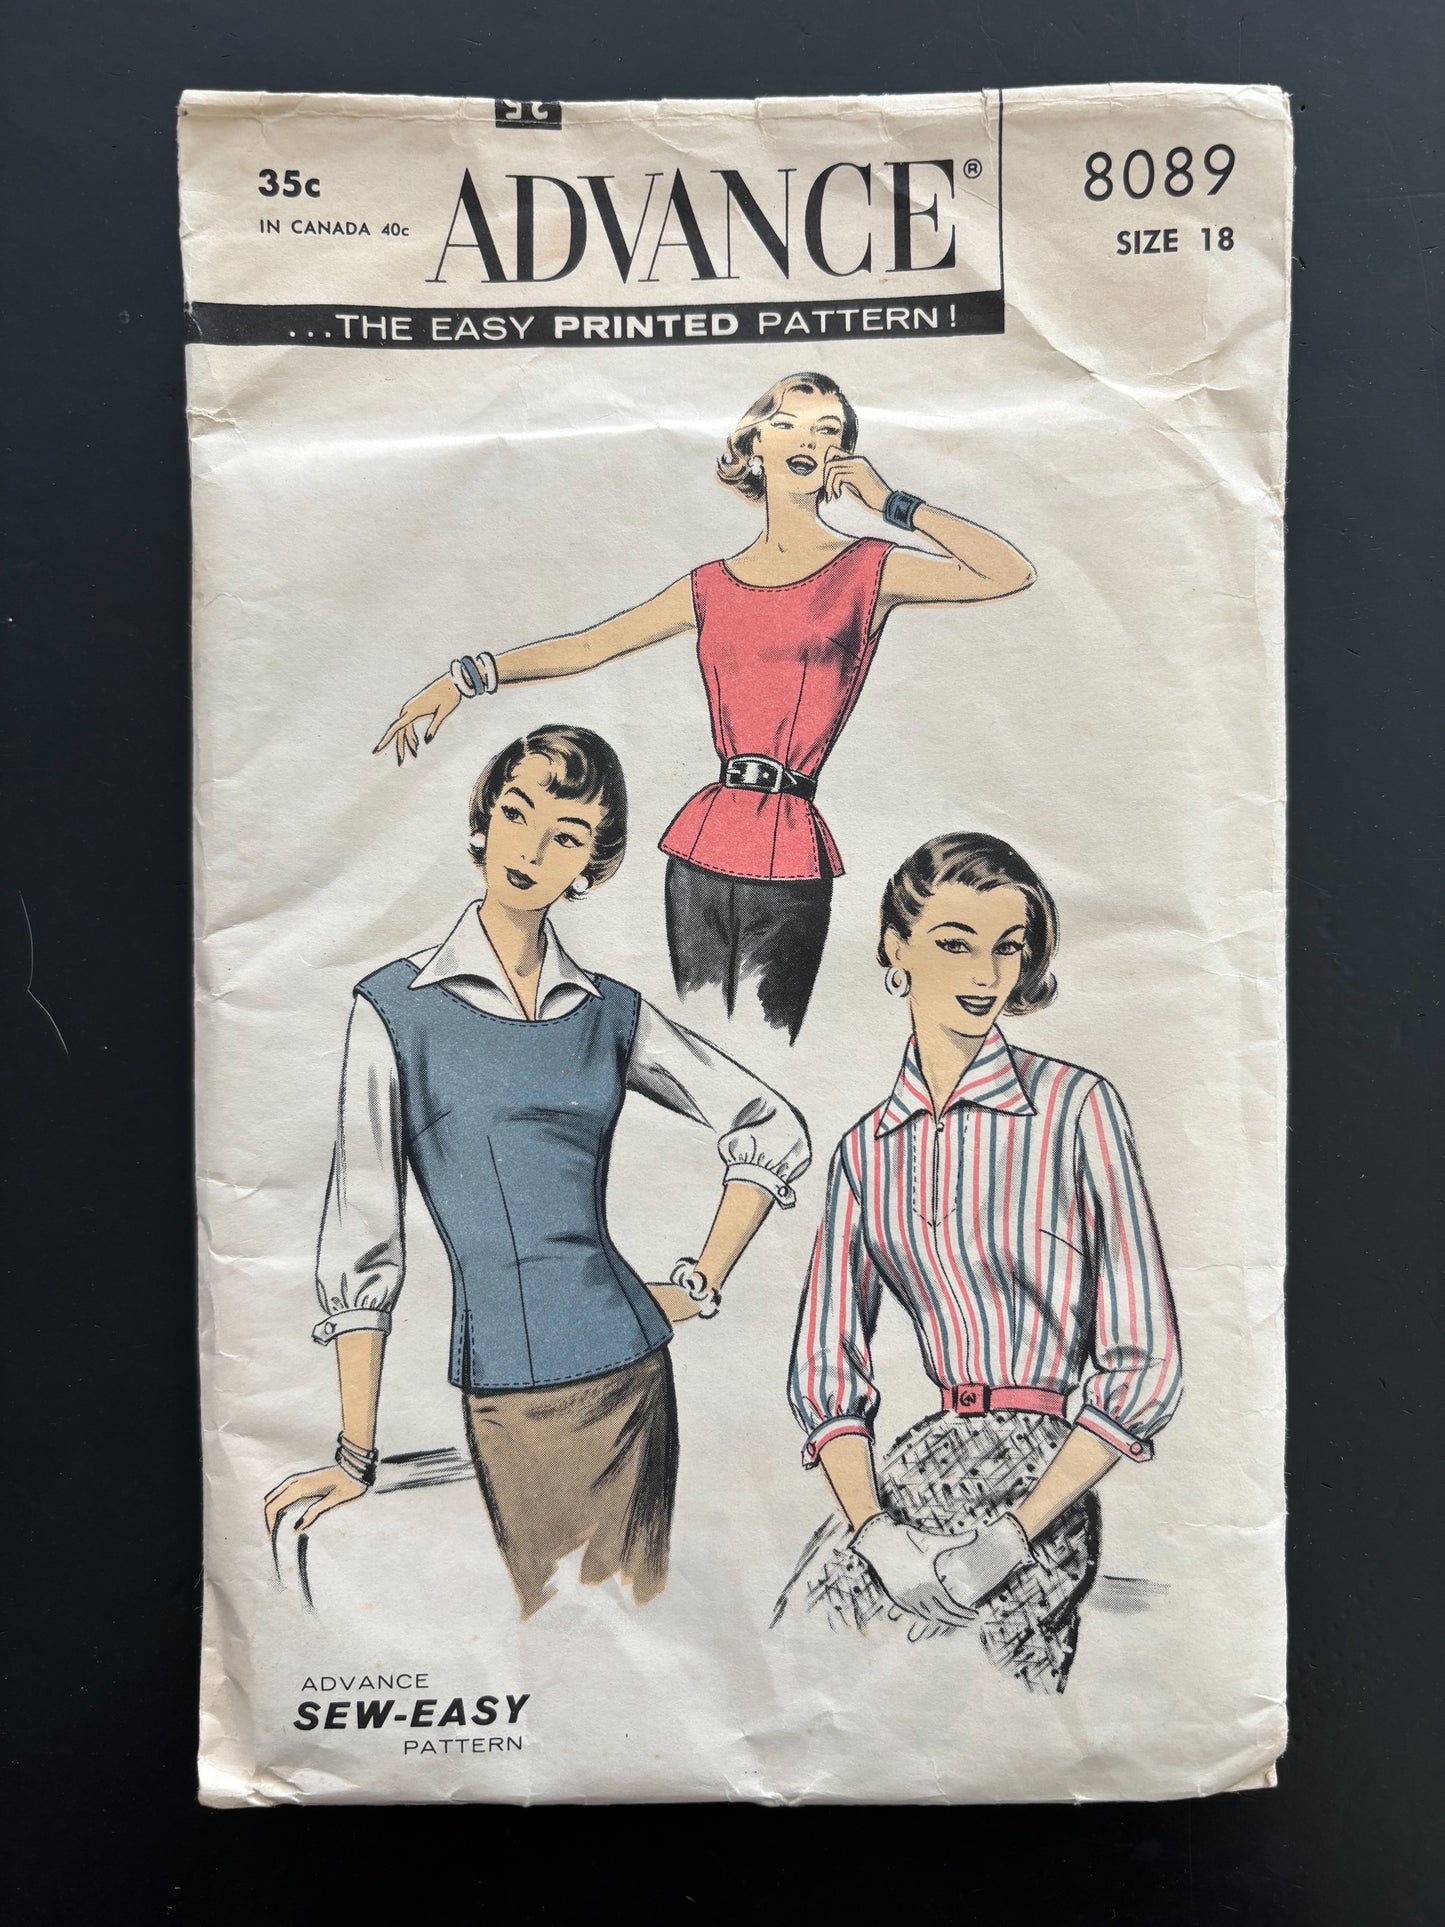 1956 Advance 8089 Sew Easy Sewing Pattern Misses' Blouse and Jerkin - Size 18